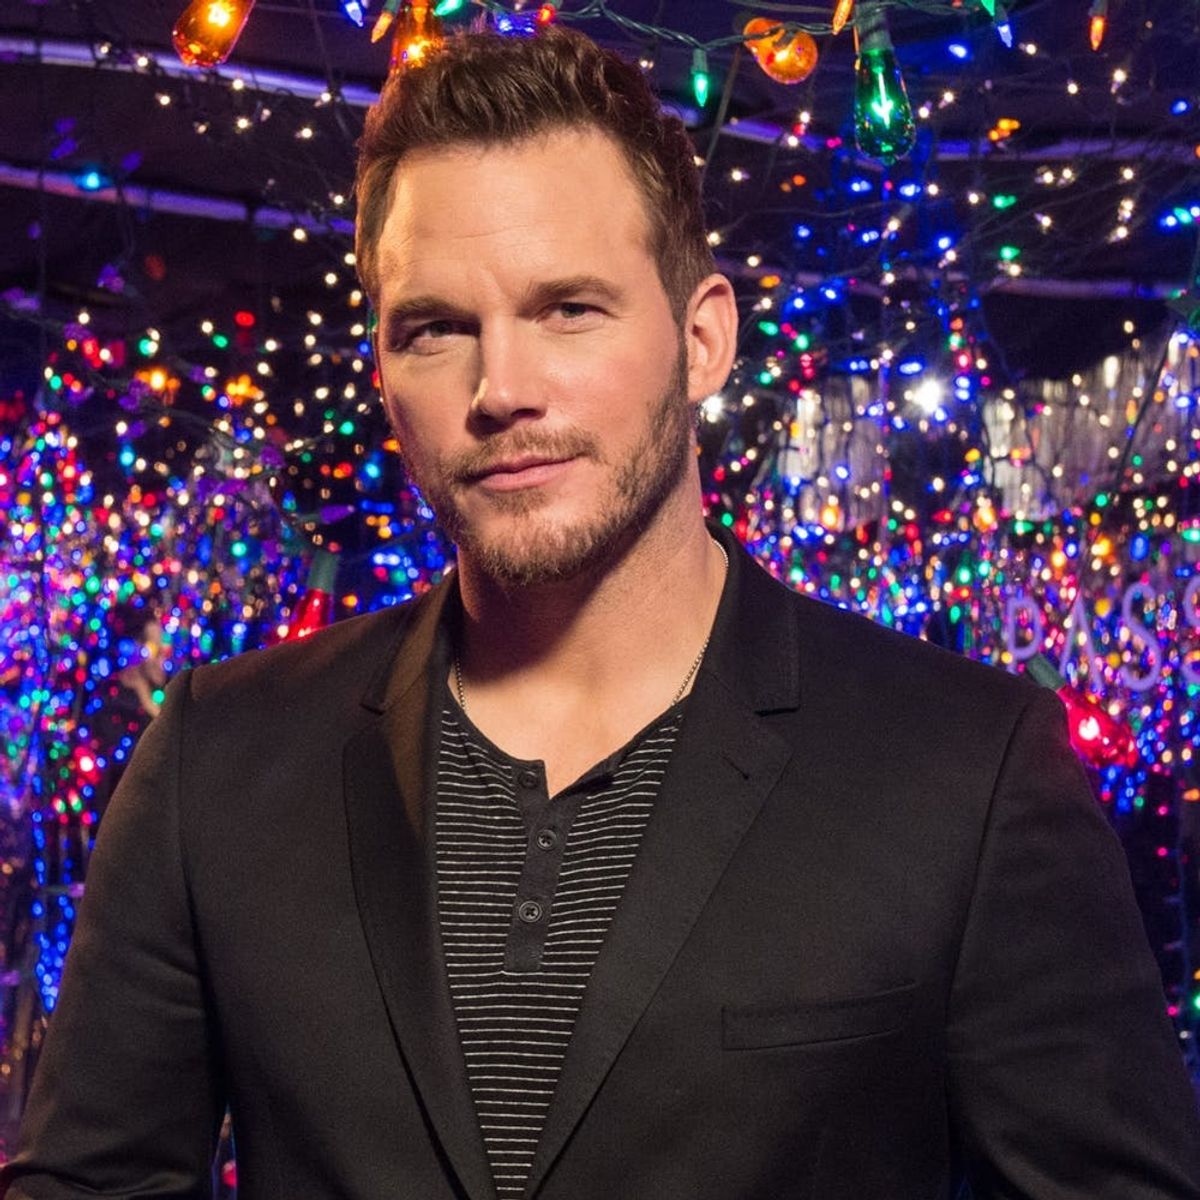 Chris Pratt Is Shirtless and Flexing in Michelob Ultra’s Super Bowl Commercial